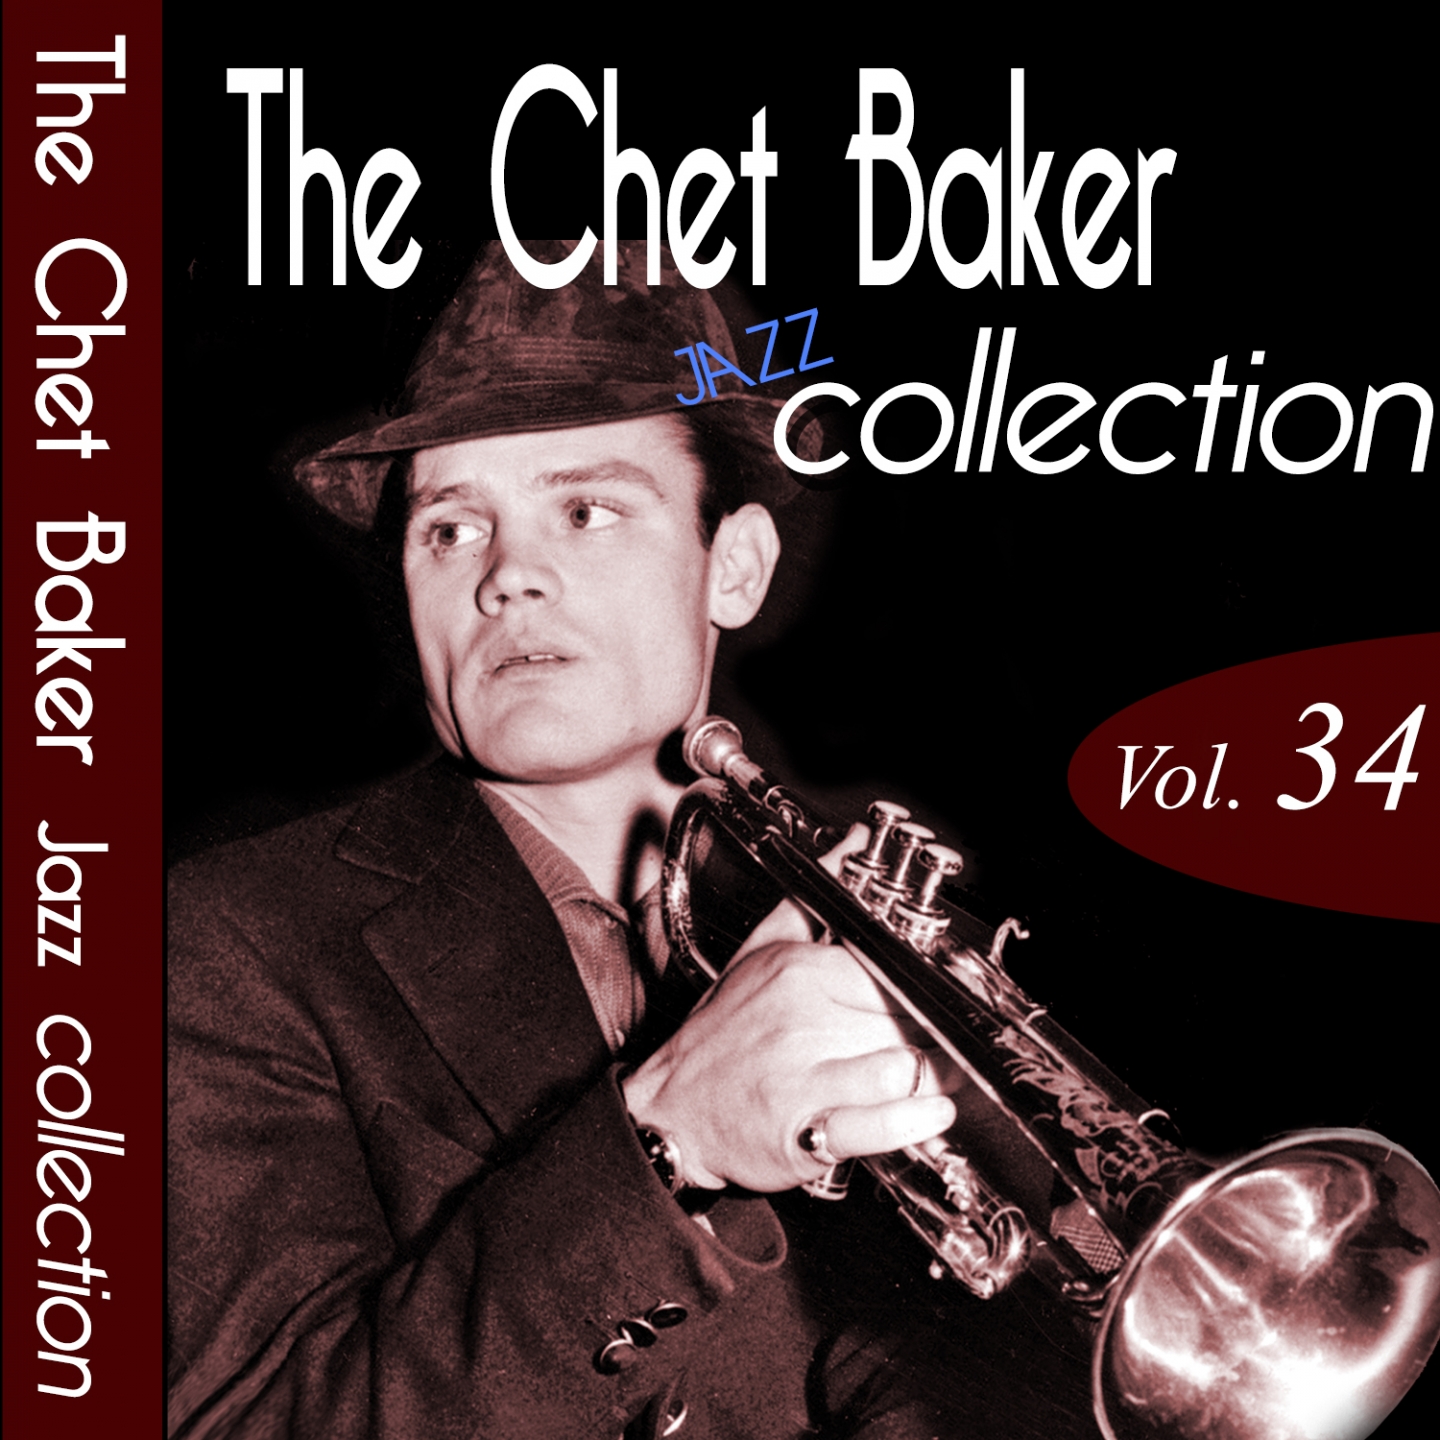 The Chet Baker Jazz Collection, Vol. 34 (Remastered)